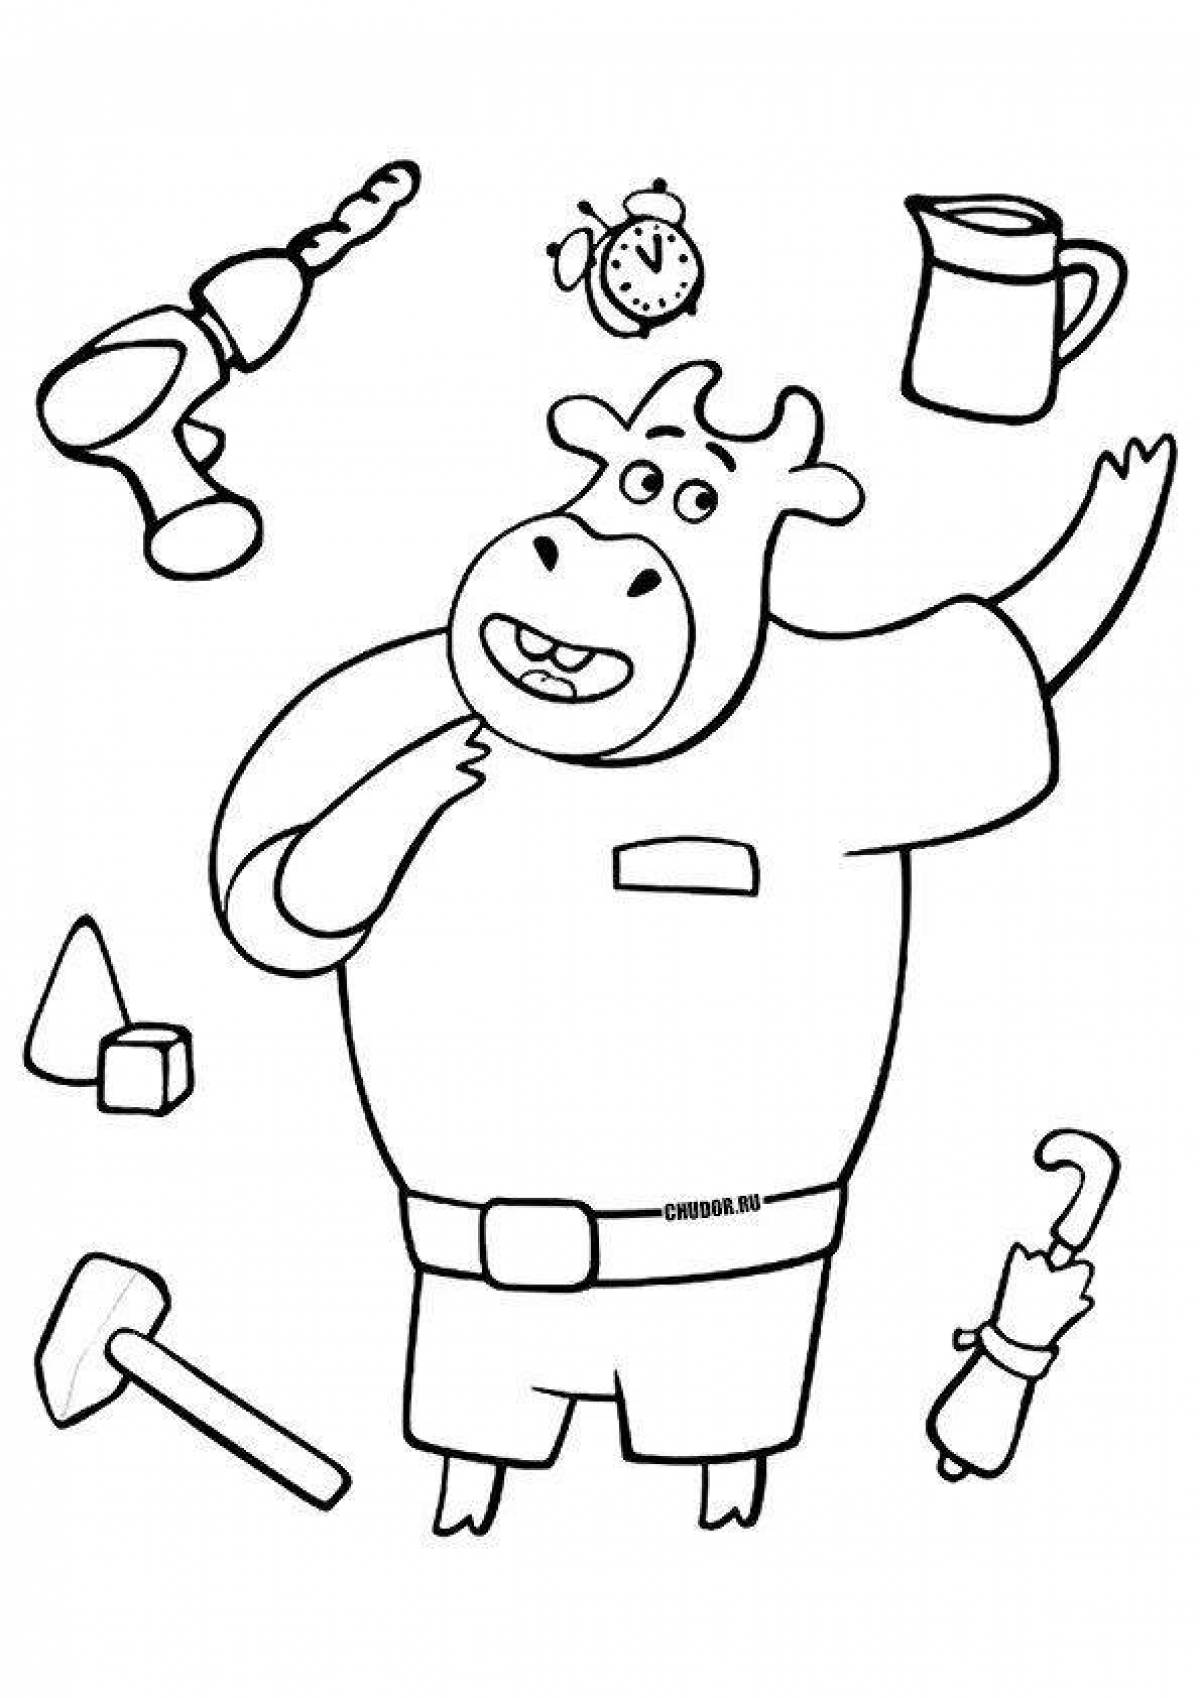 Creative orange cow coloring book for kids